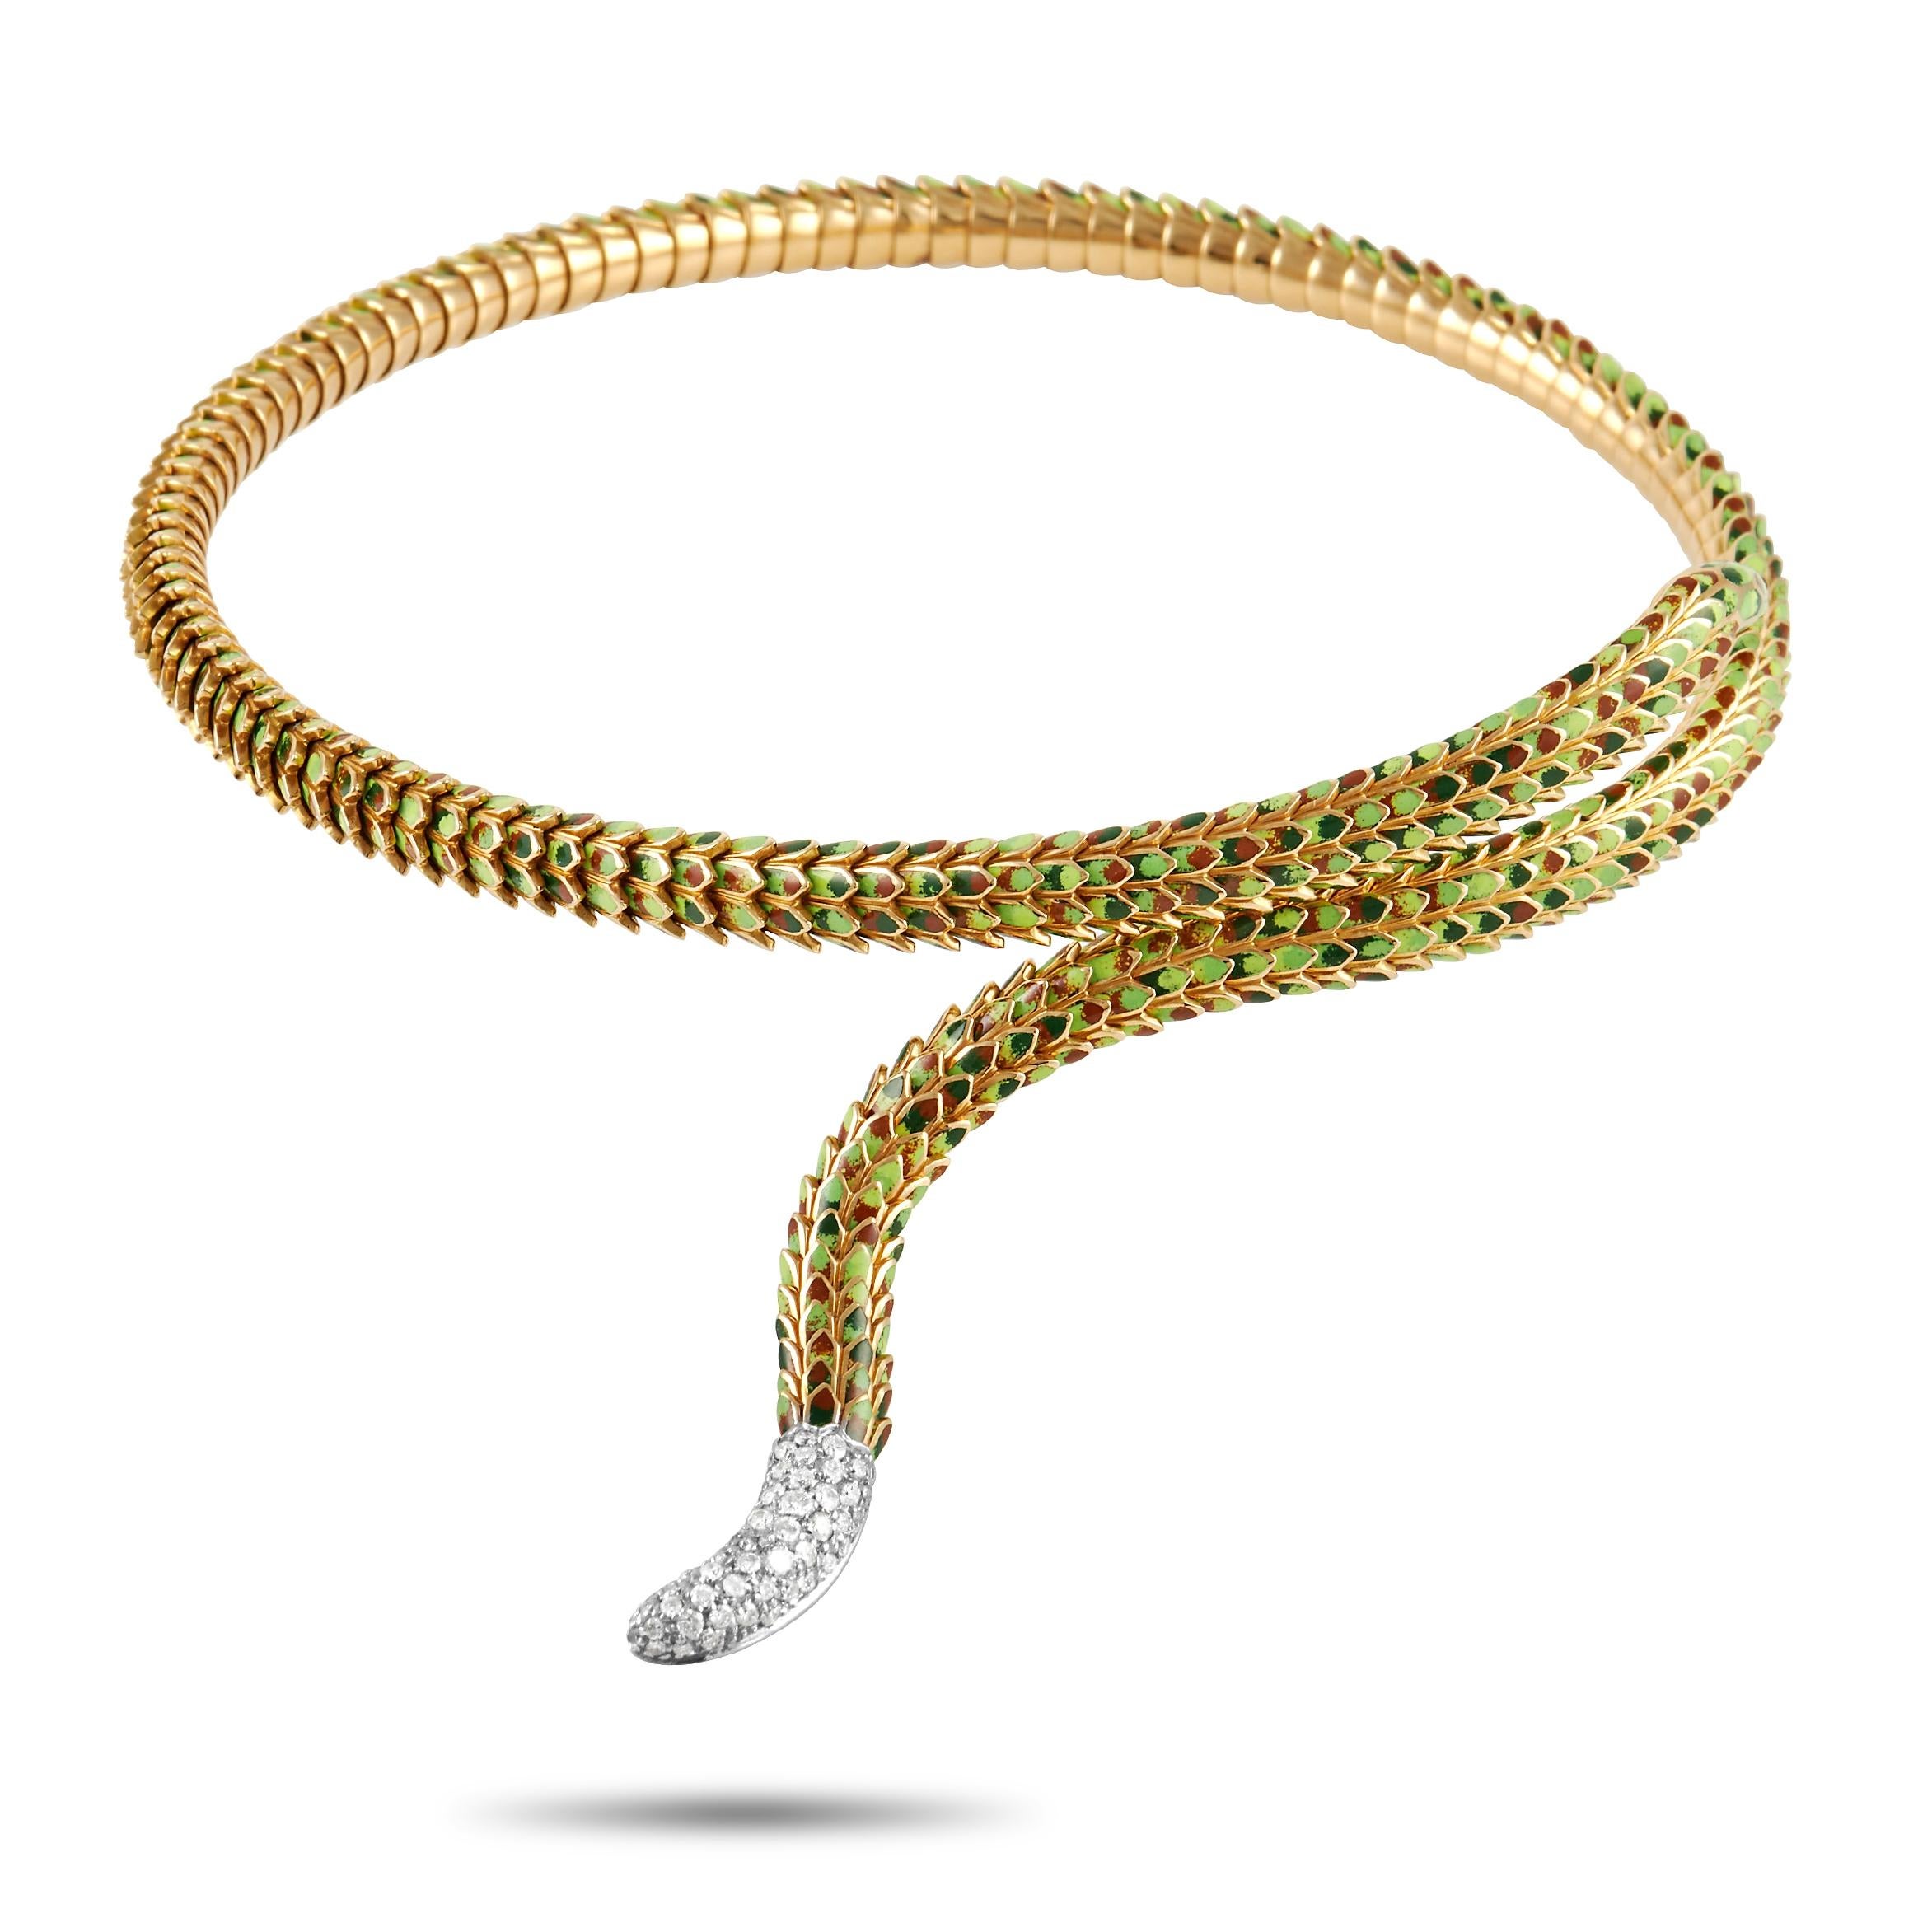 This Roberto Coin necklace is a veritable work of art. Crafted from 18K Yellow Gold, green enamel scales add lifelike elegance to this luxurious piece of jewelry. The tail is also covered in glittering pavé diamond gemstones with a total weight of